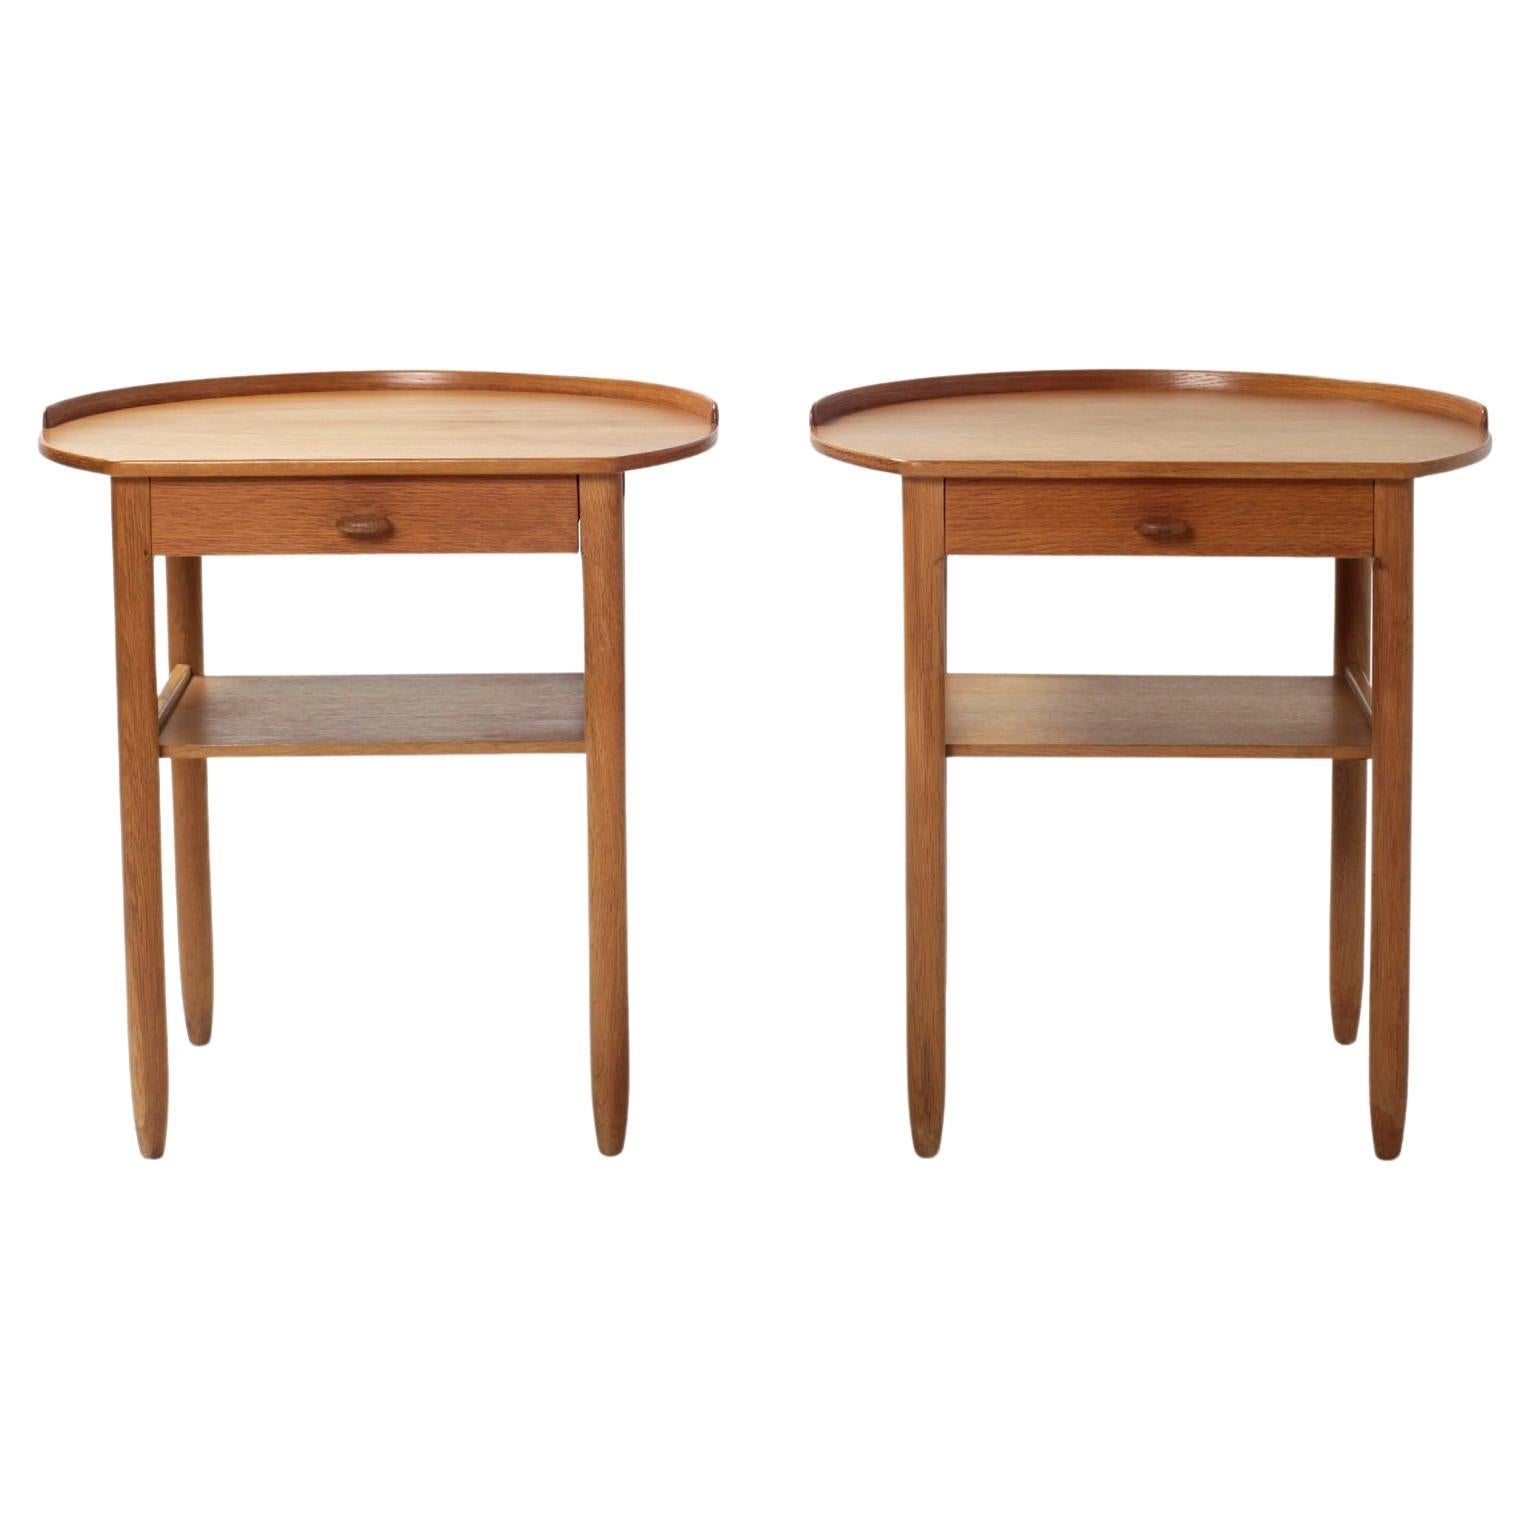 Pair of Bedside Tables by Sven Engström and Gunnar Myrstrand for Bodafors 1960's